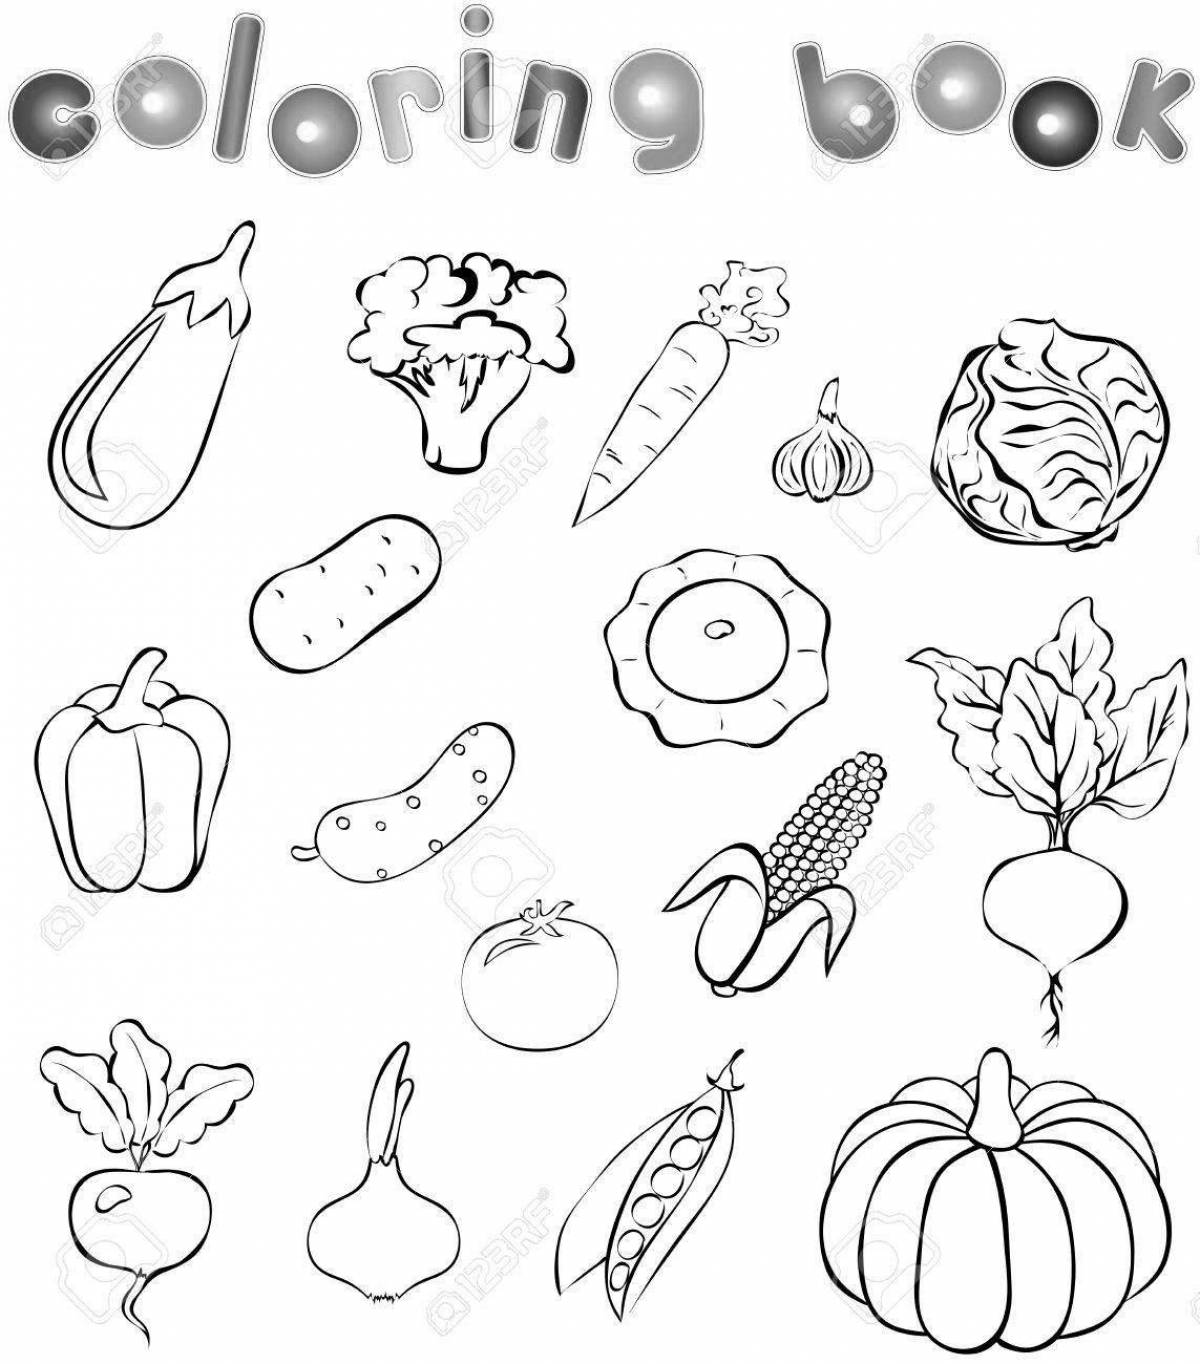 Adorable vegetable coloring book for kids